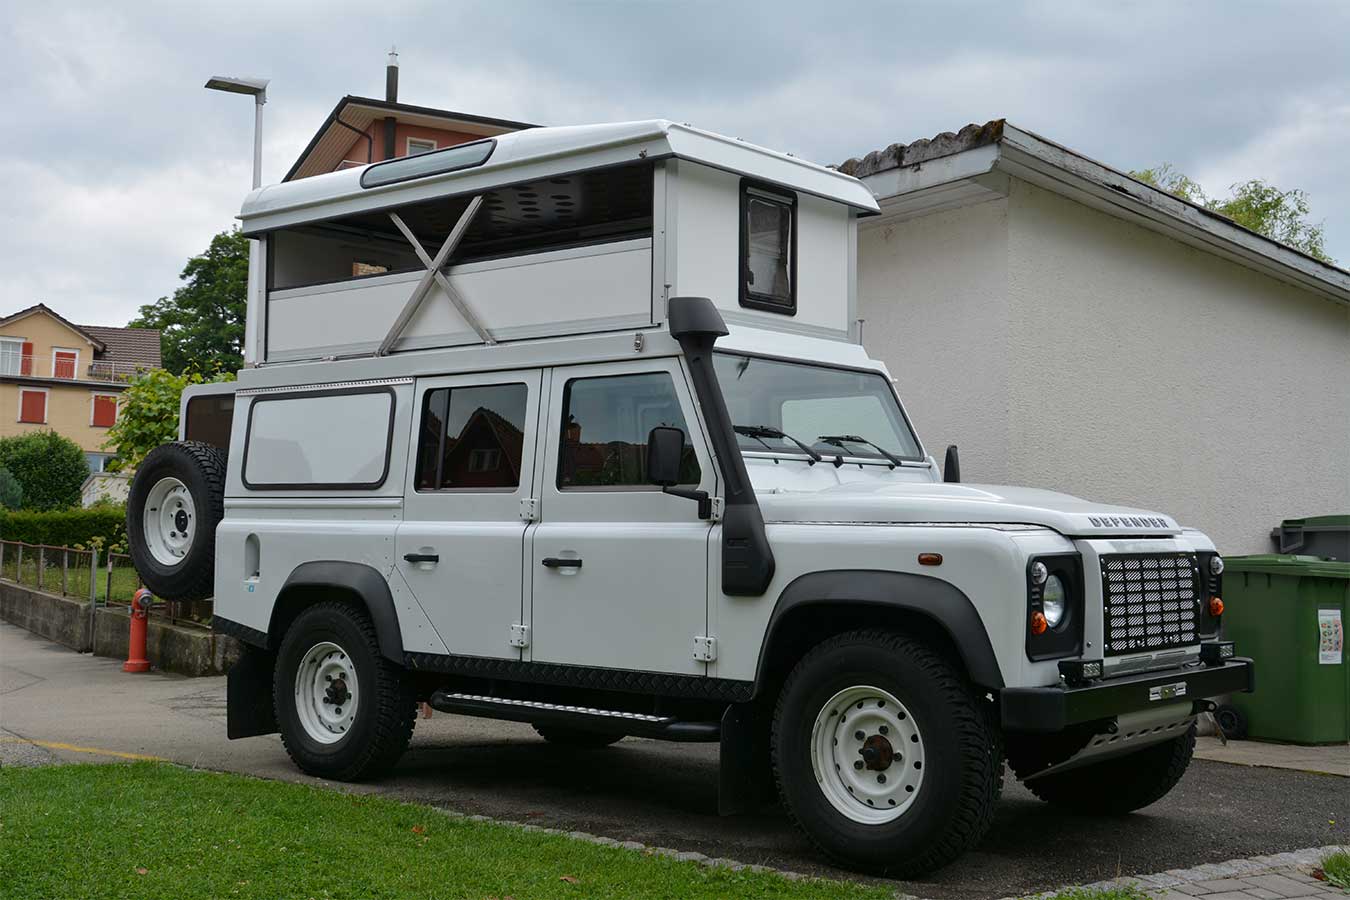 Landrover Parallel-Hubdach